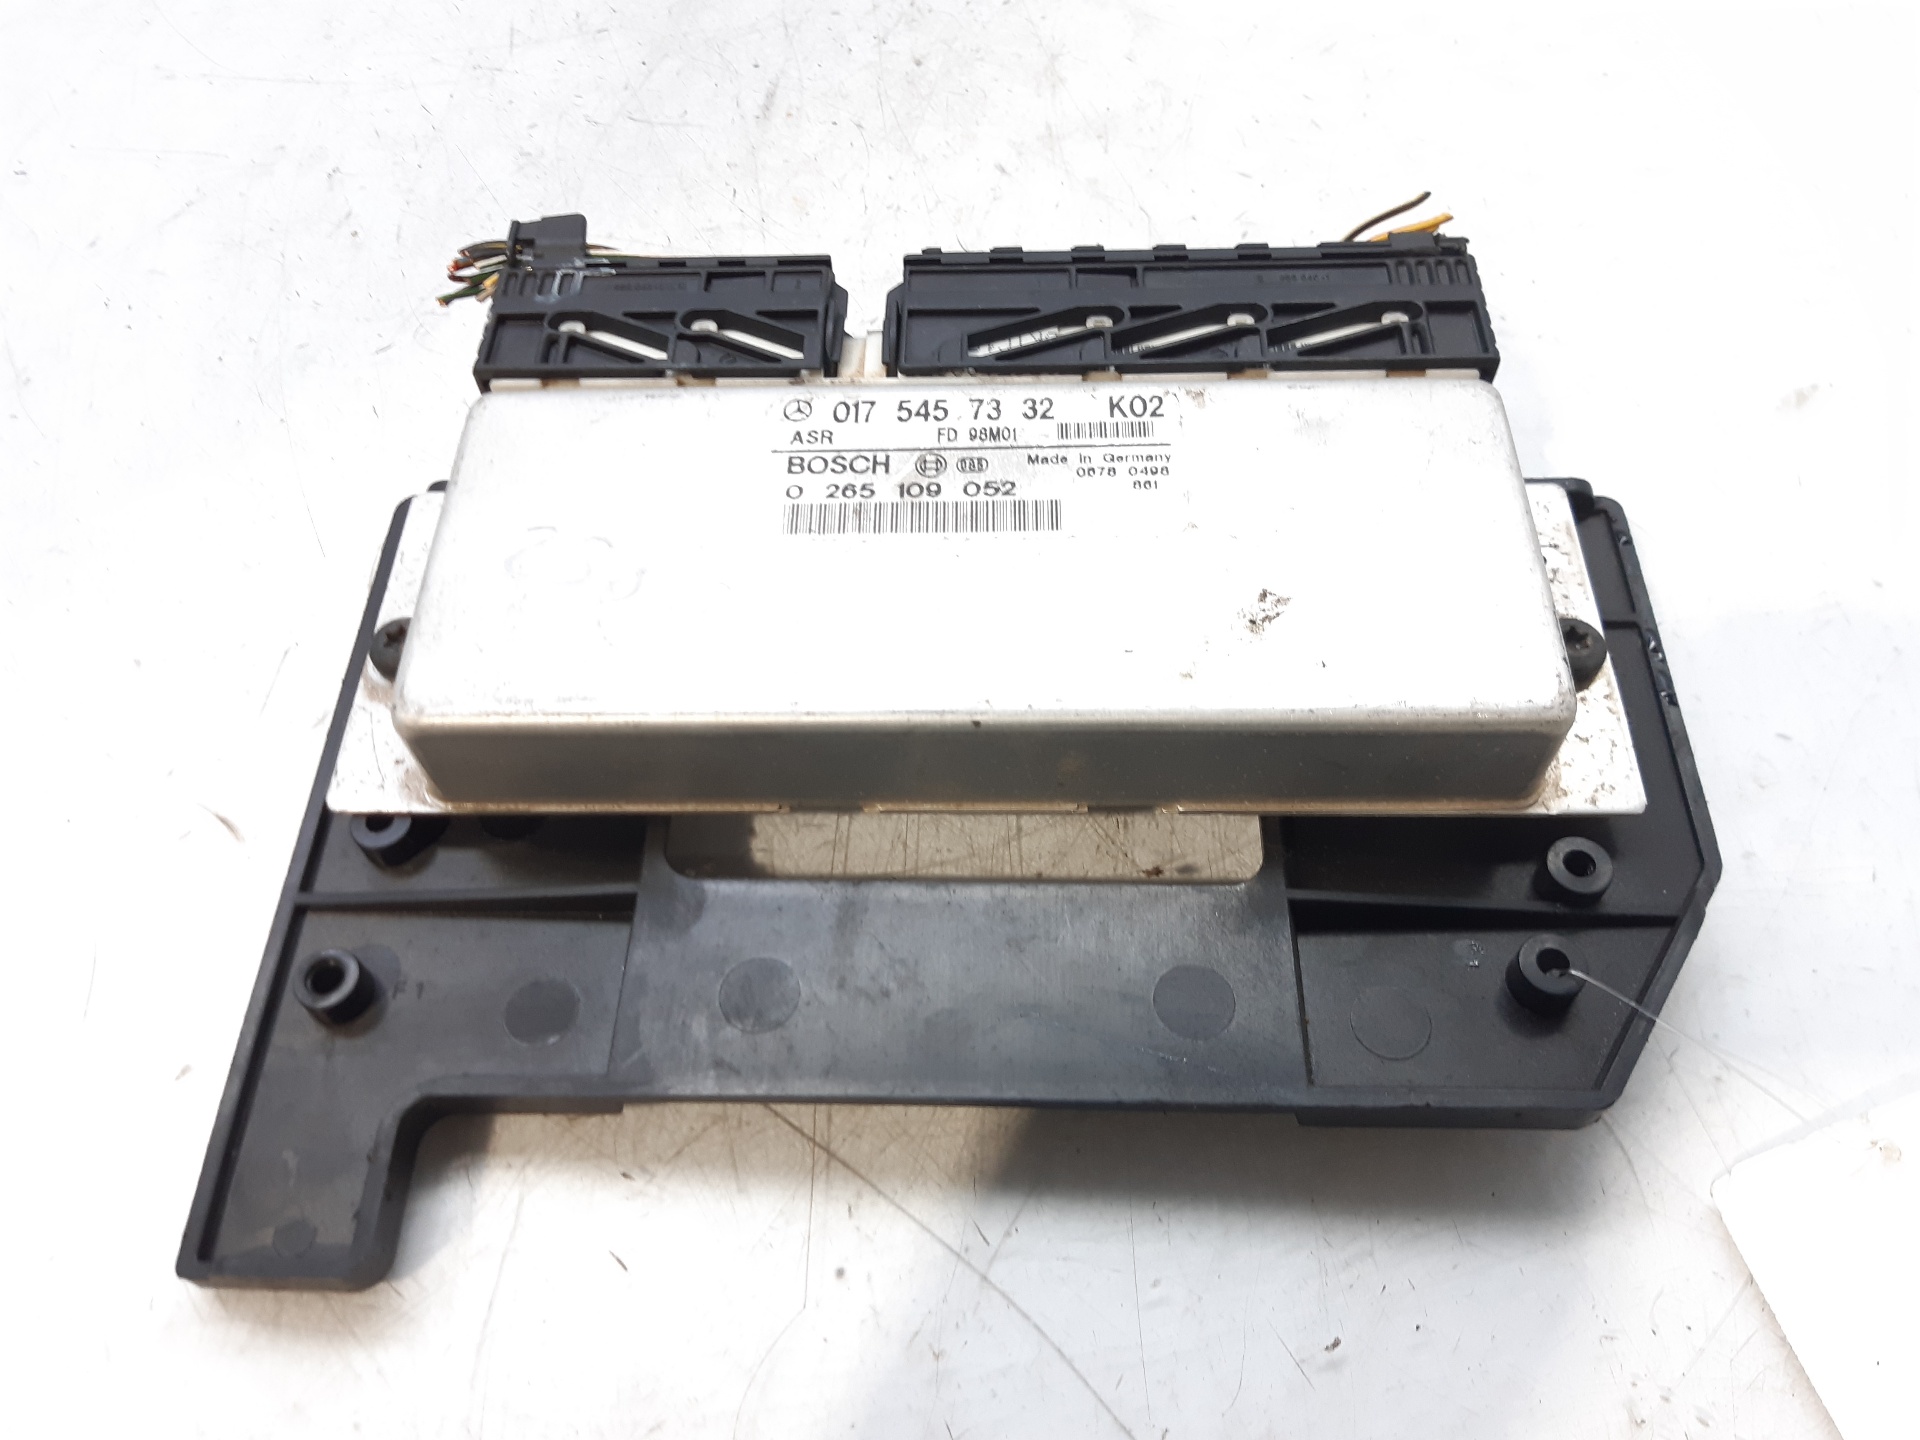 MERCEDES-BENZ C-Class W202/S202 (1993-2001) Other Control Units 0175457332 18726001